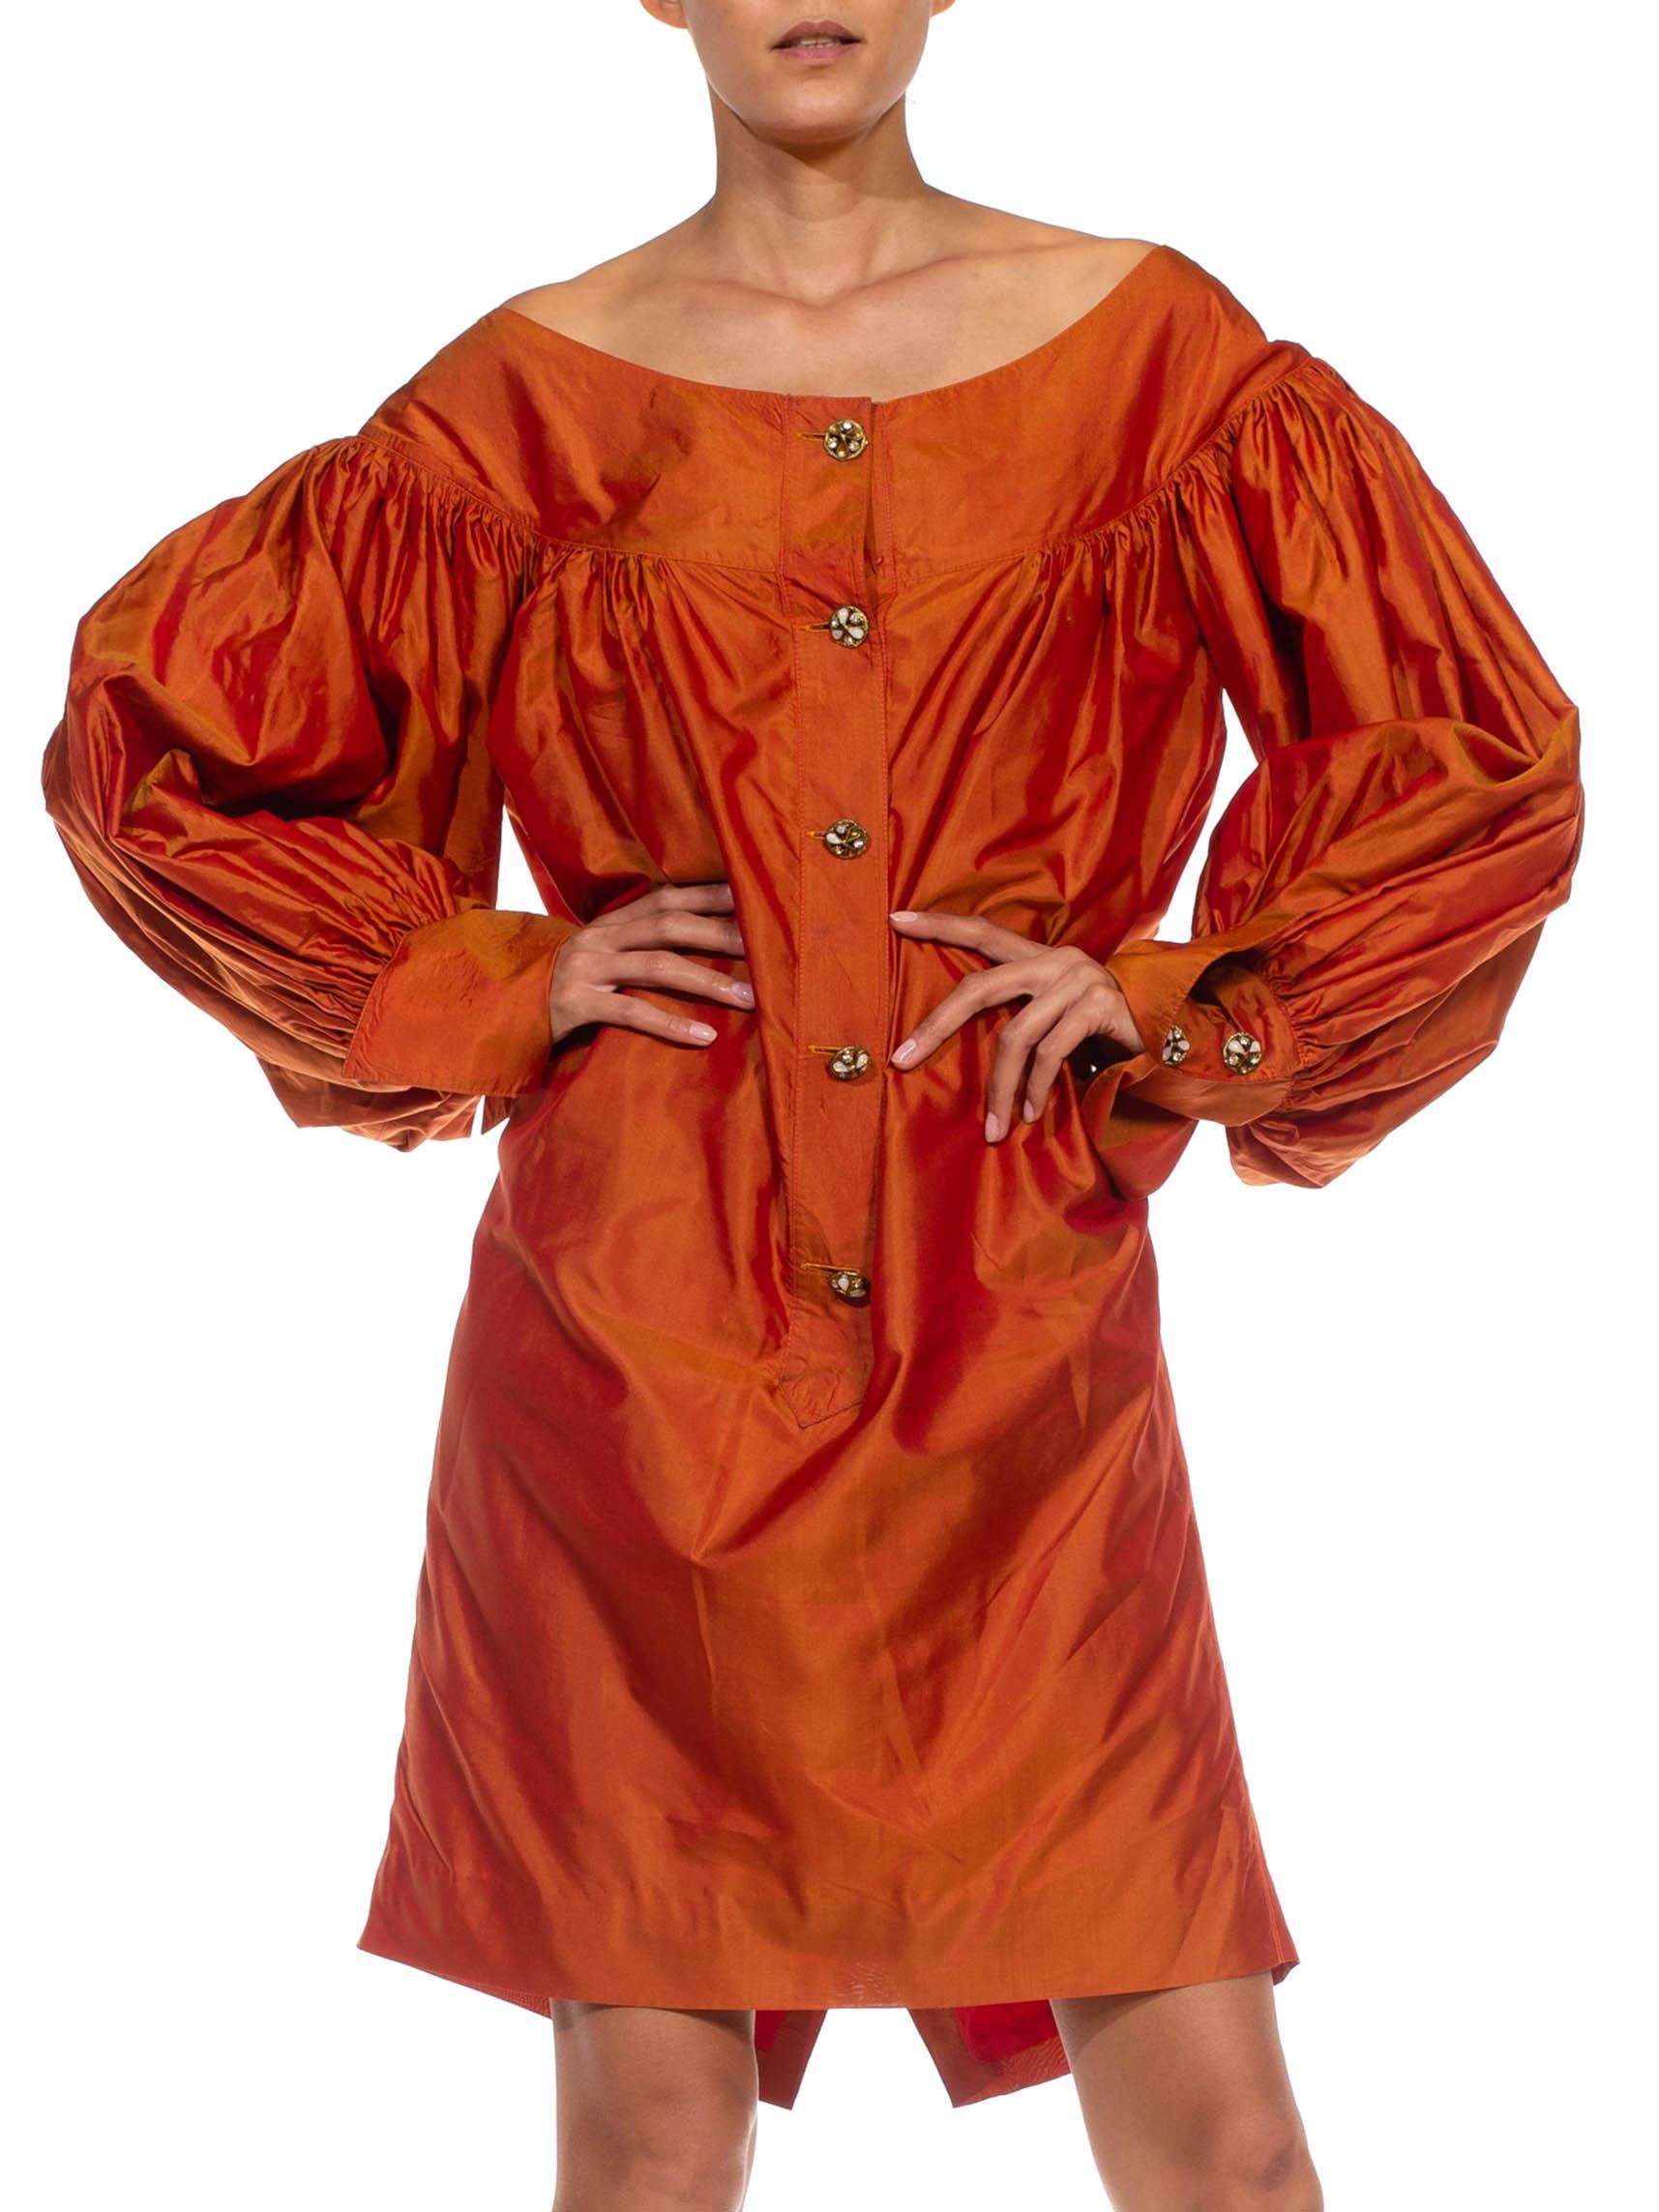 1980S NORBURY AND OSUNA Orange Iridescent Silk Taffeta Dress In Excellent Condition For Sale In New York, NY